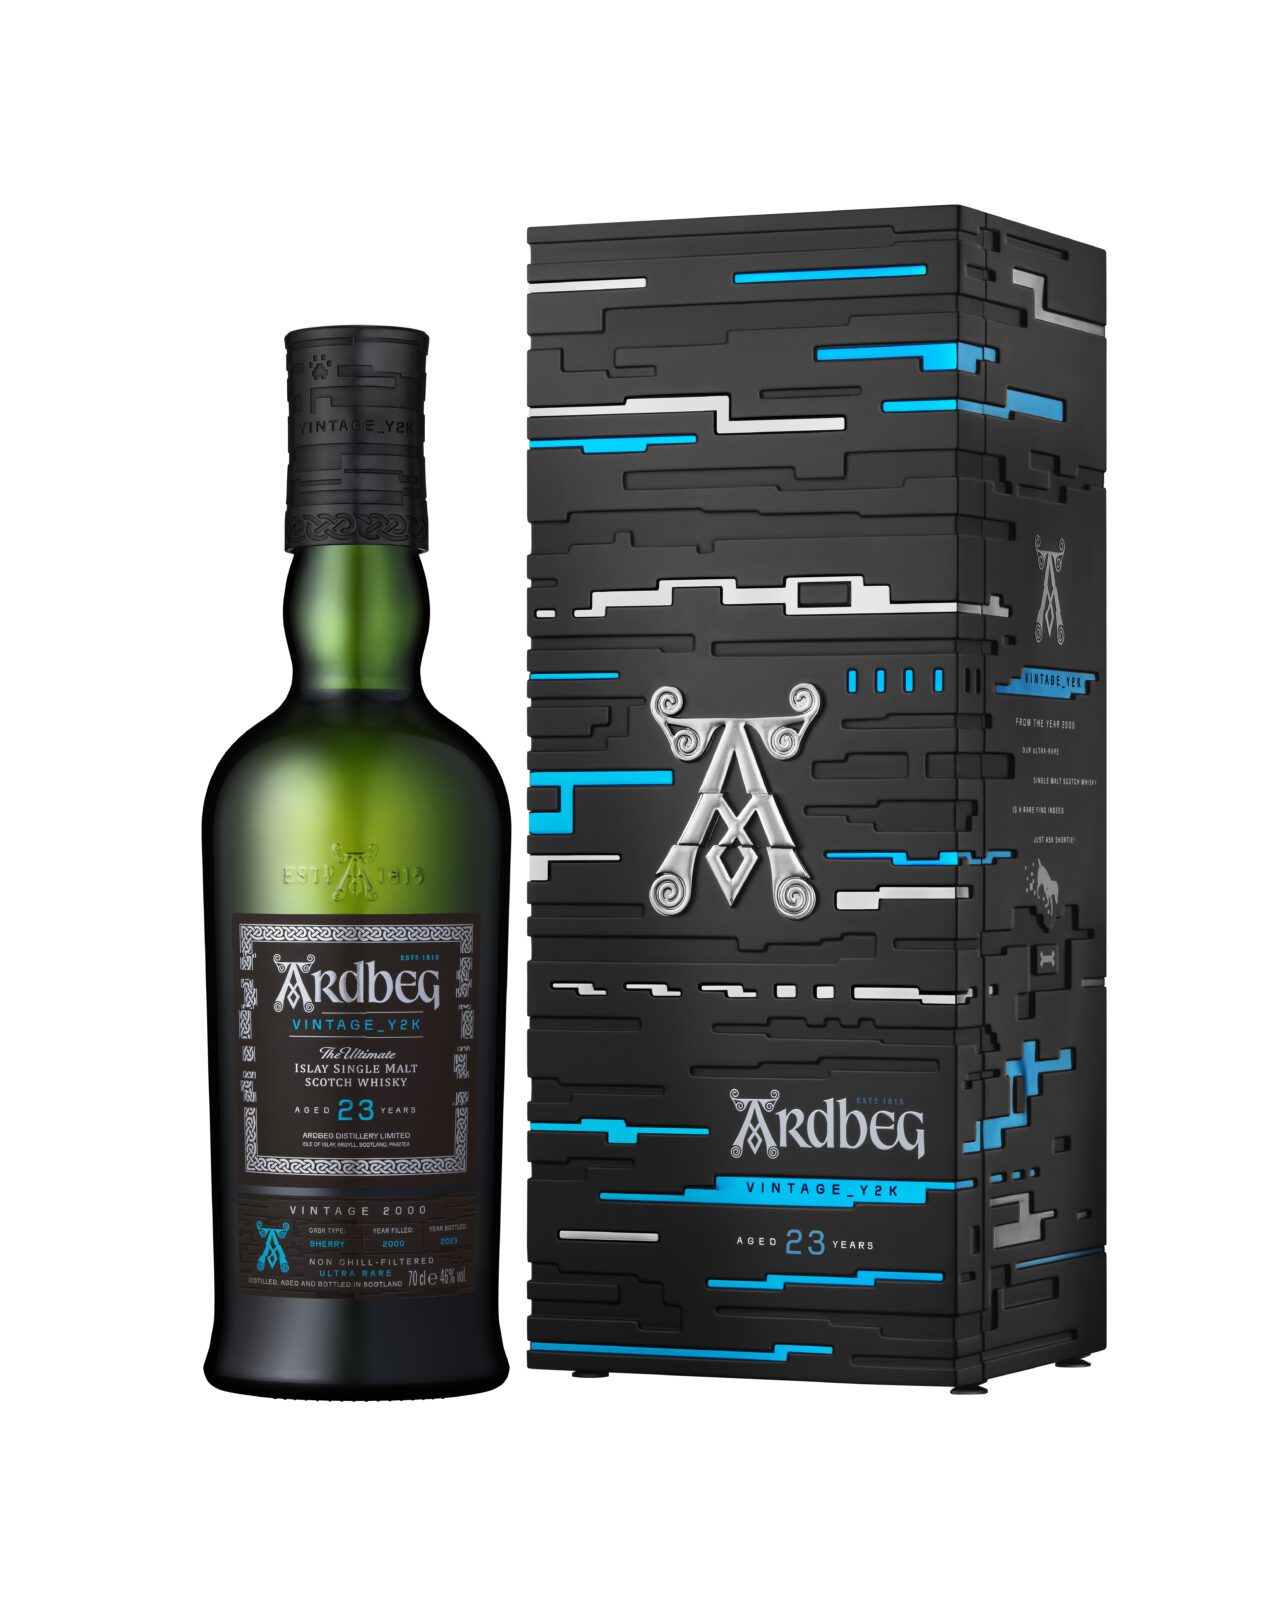 Ardbeg to release Y2K 23 year old whisky - the first in a limited edition series